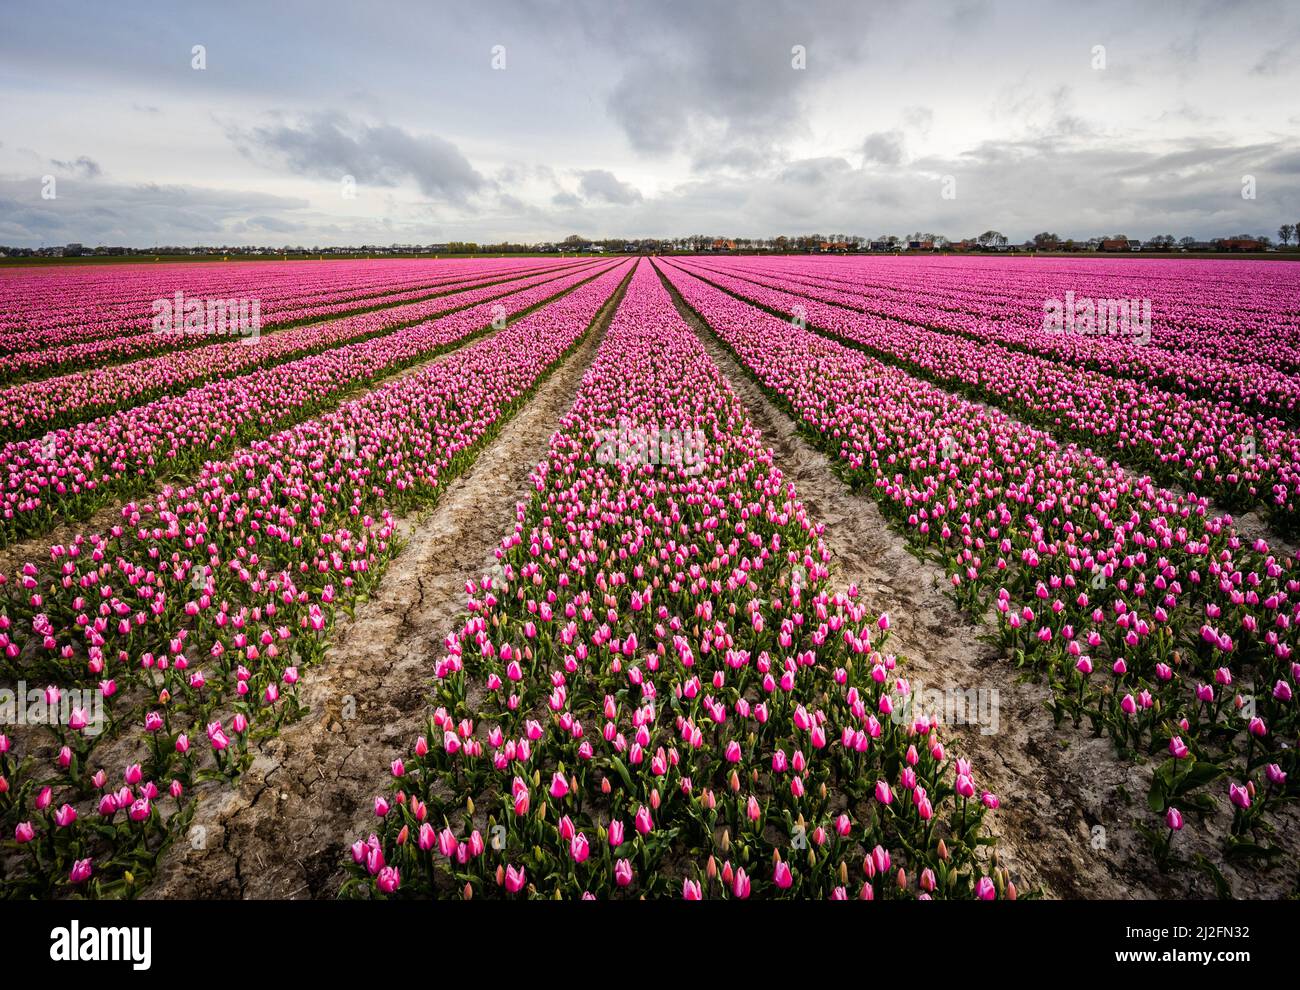 2022-03-31 08:12:47 31-03-2022, Zuid-Beijerland - Tulip fields in bloom on a field in Zuid-Beijerland. The tulips bloom early this year due to the beautiful sunny weather. Photo: ANP / Hollandse Hoogte / Jeffrey Groeneweg netherlands out - belgium out Stock Photo